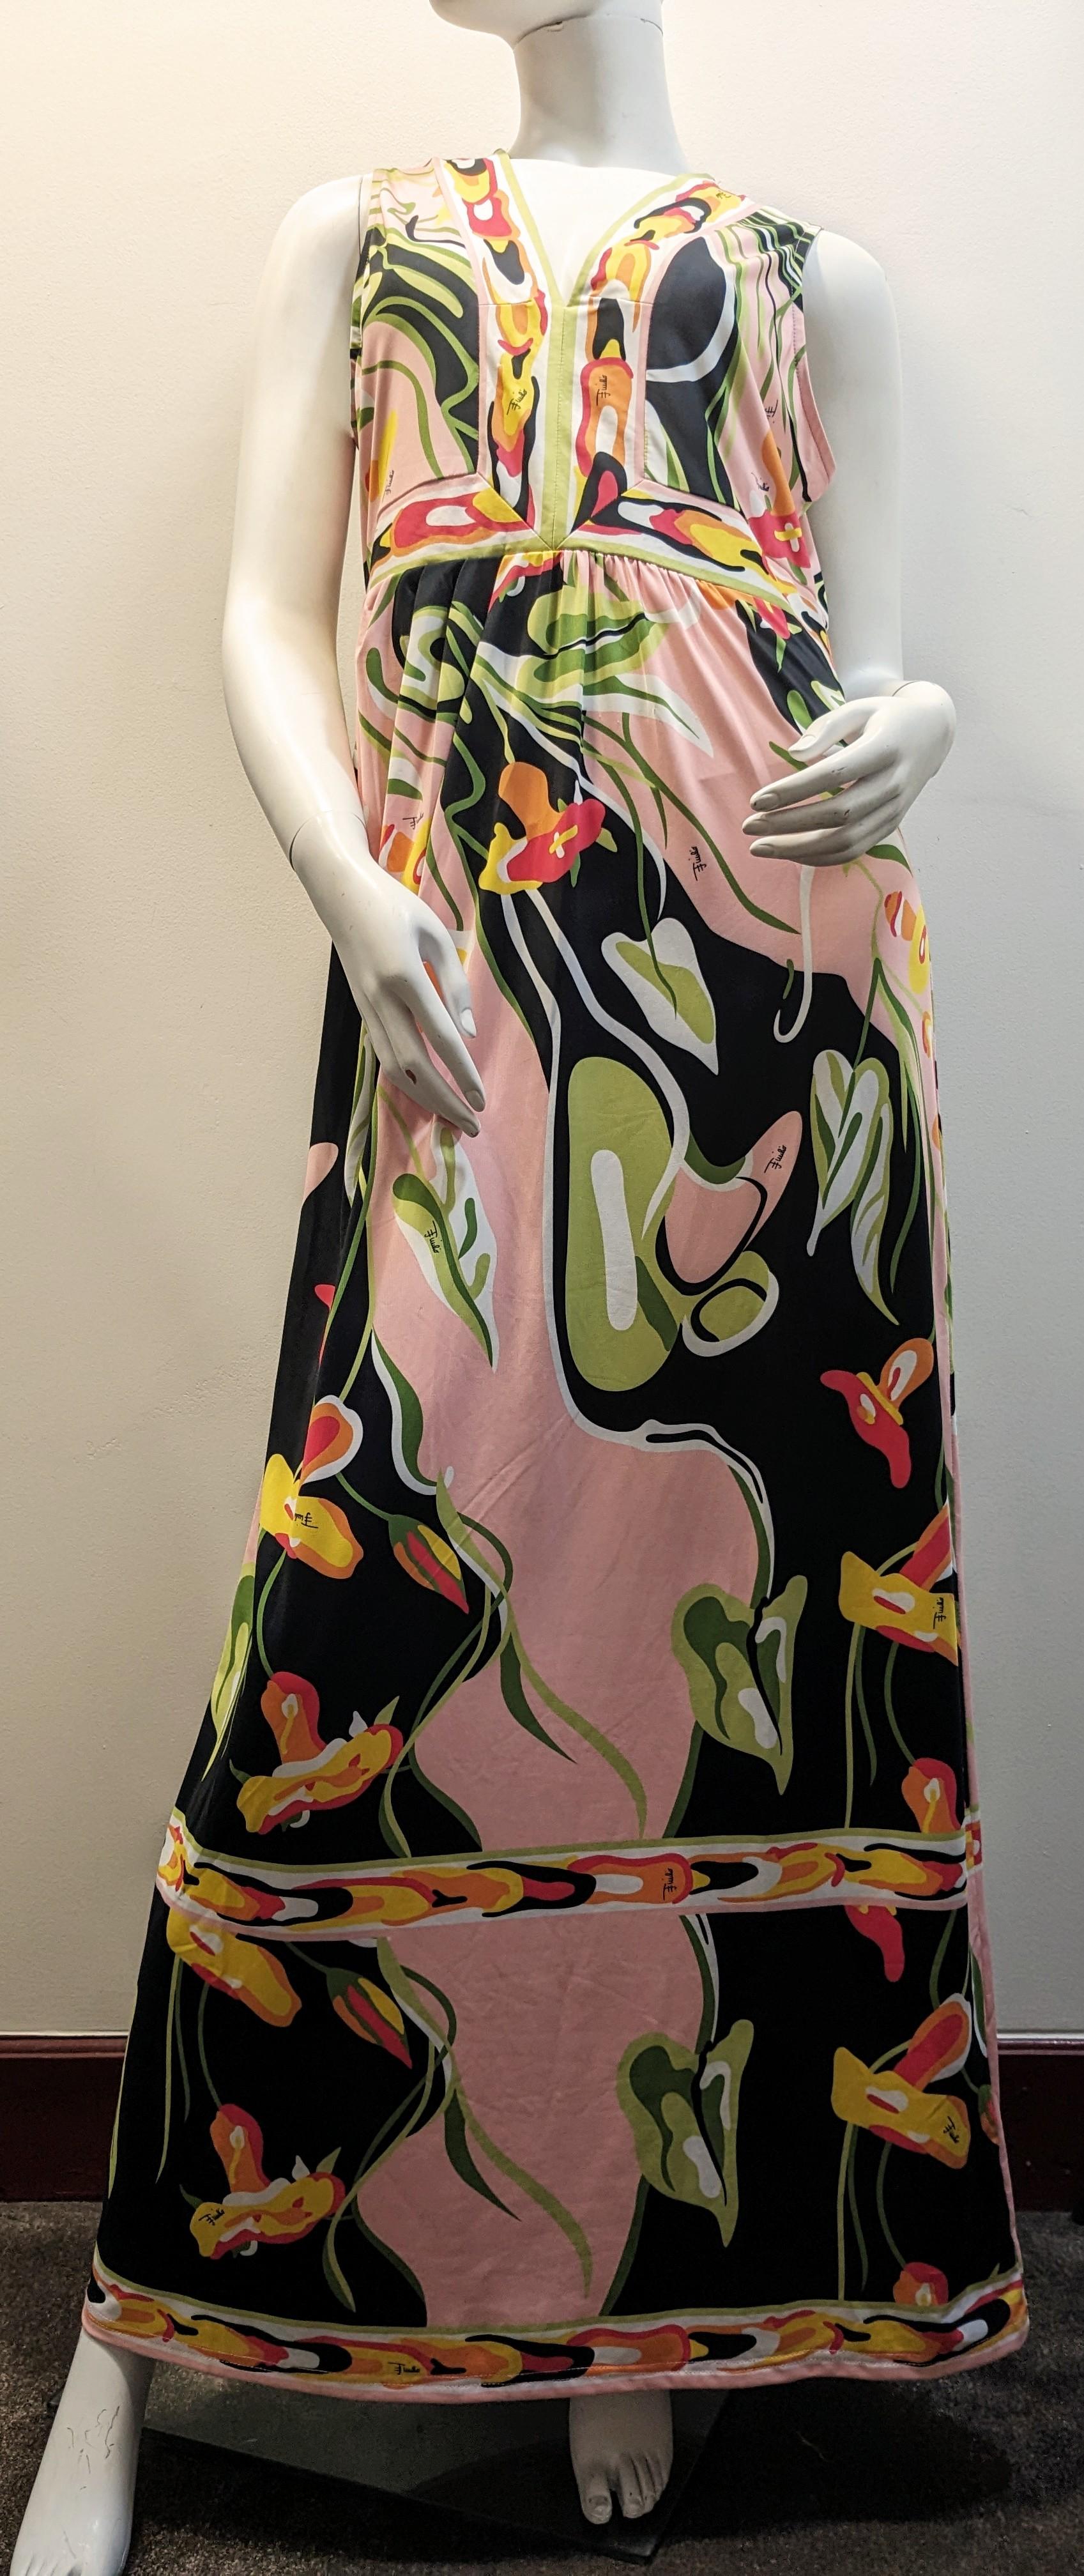 Vintage  EMILIO PUCCI Pink, Black and green Silk Psychelic and flowe Print Long Dress
Emilio Pucci Silk Jersey Maxi Dress with Banded, Contoured Bodice in Classic Pucci Print of Flowers,  Origami Motifs in Pink, green and black colours.  
Flattering